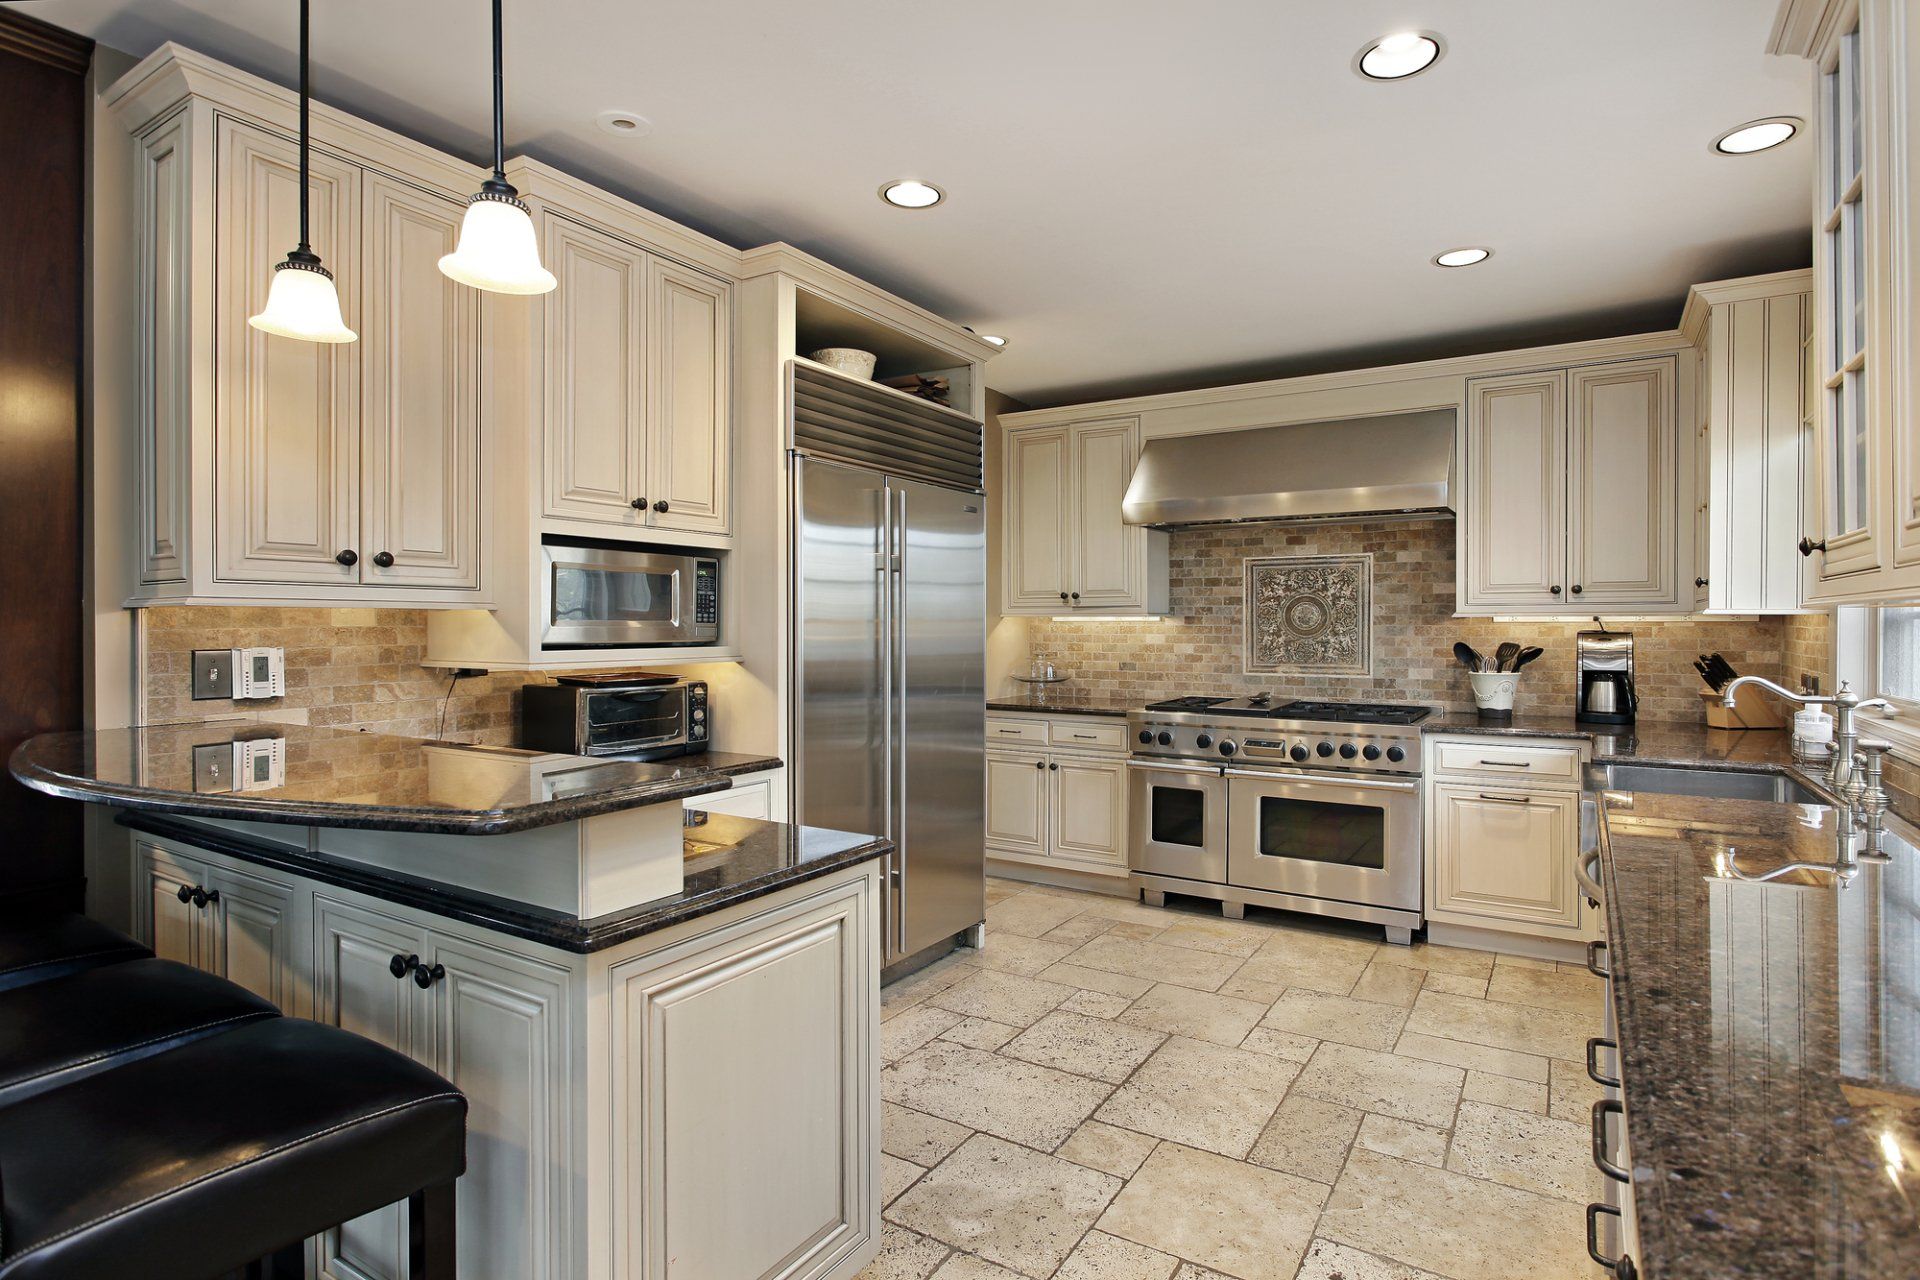 Kitchen Remodeling Service in Havertown, PA